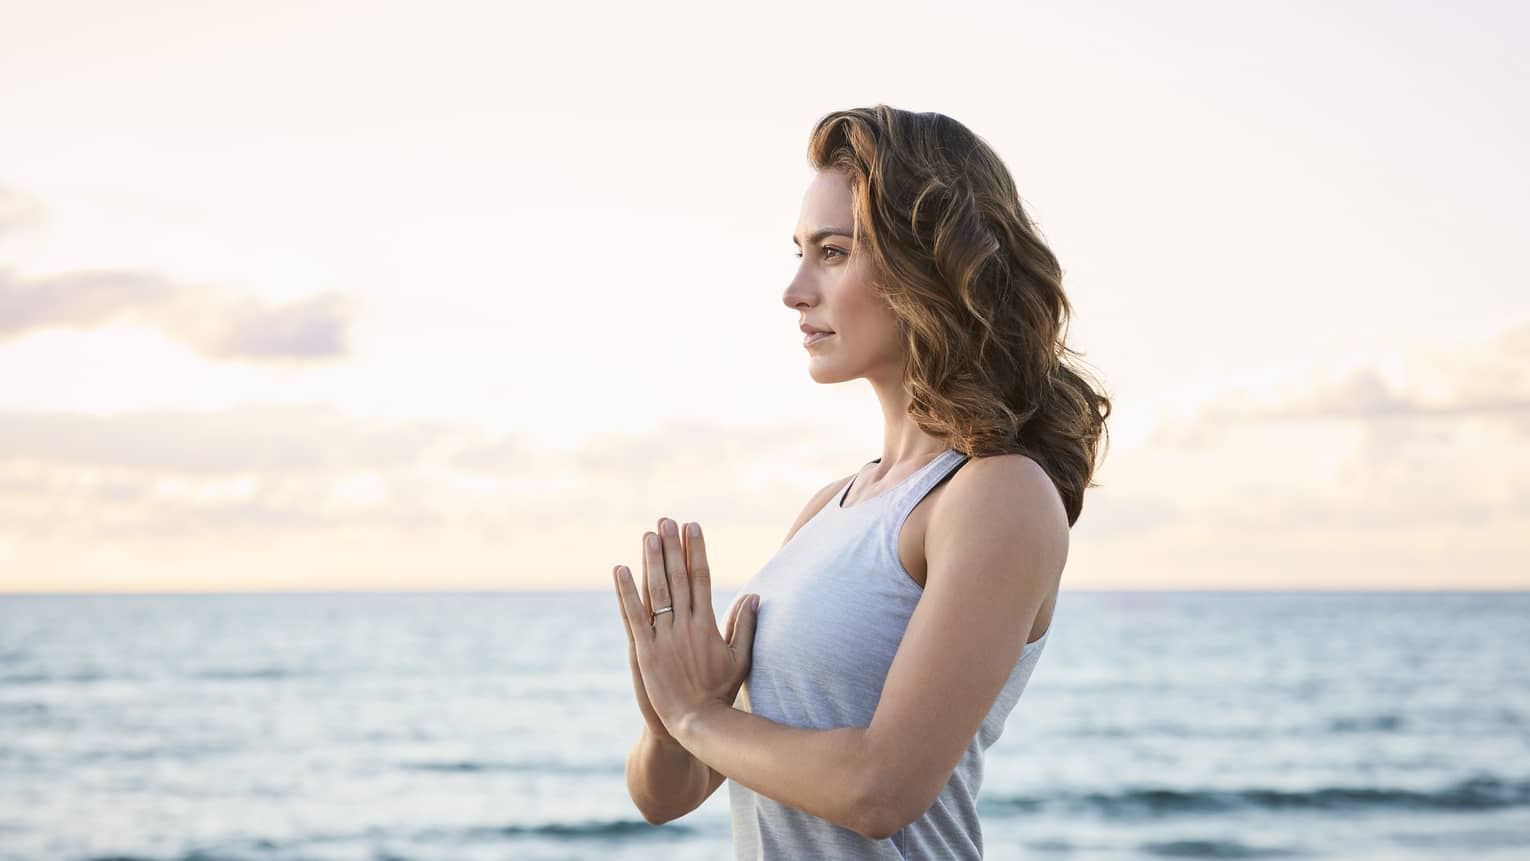 Woman with hands in prayer pose, acting calm on a beach with the ocean in the background